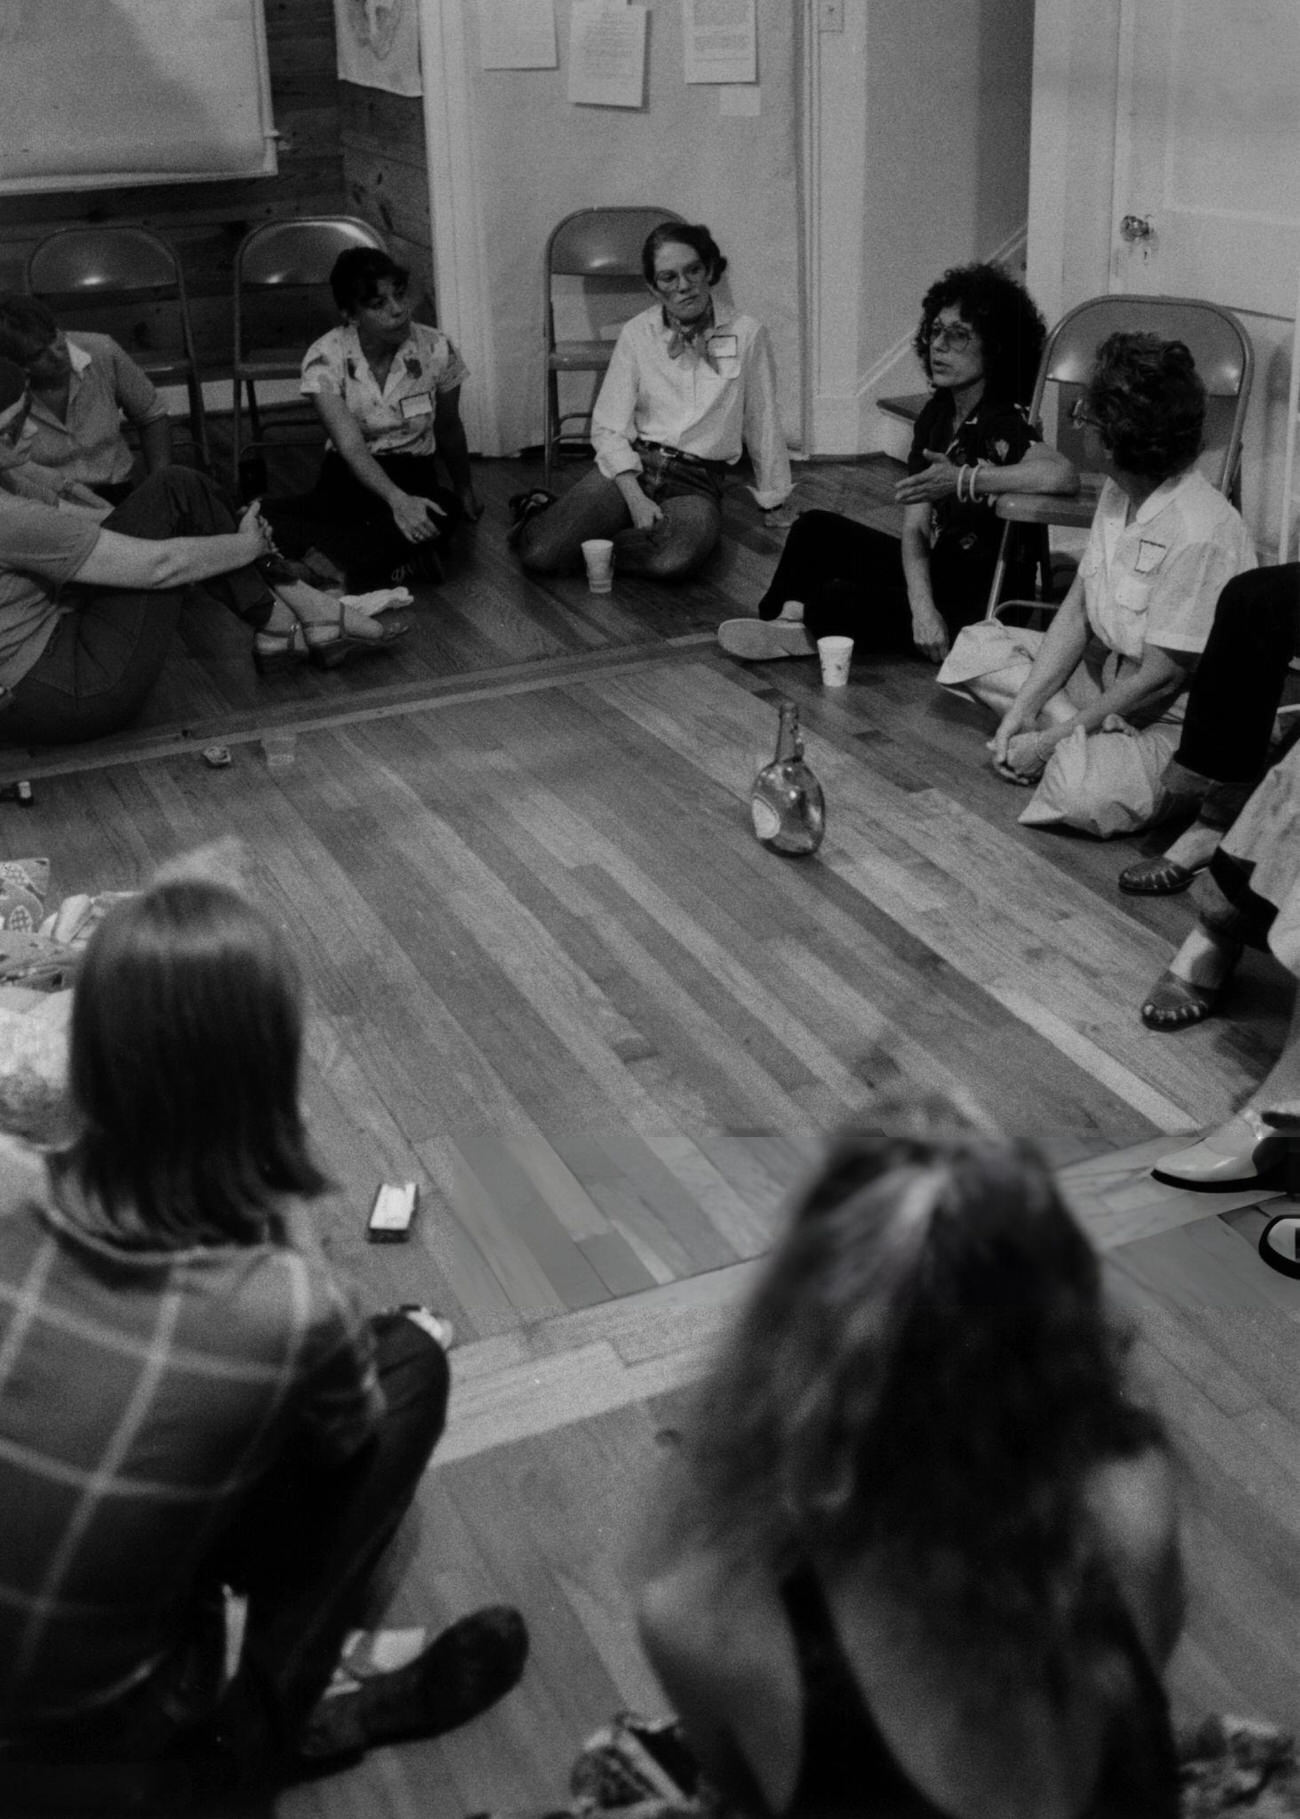 Artist Judy Chicago discusses The Birth Project with Houston women at a Texas Arts and Cultural Organization meeting, July 1981.